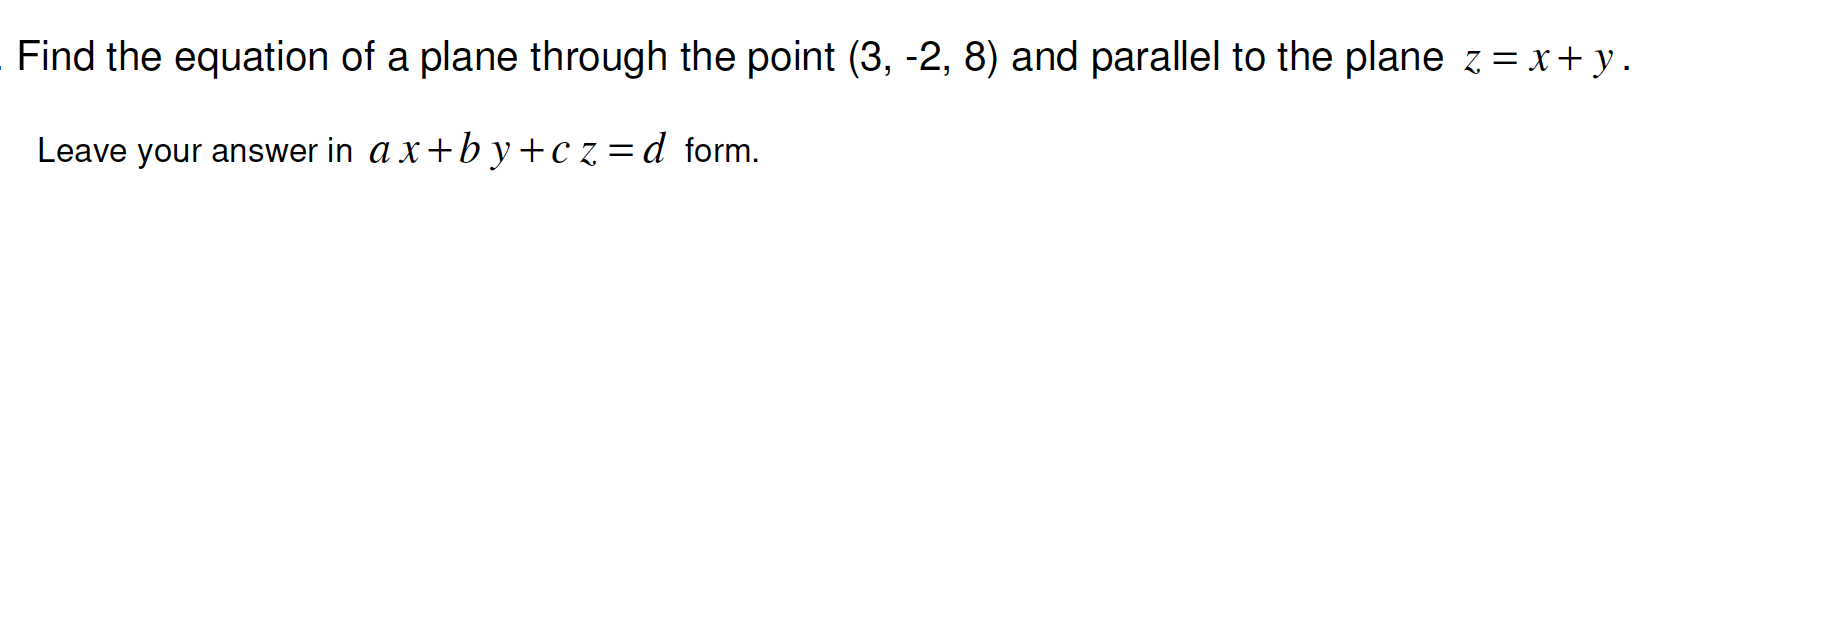 Find the equation of a plane through the point (3, -2, 8) and parallel to the plane z=x+ y.
